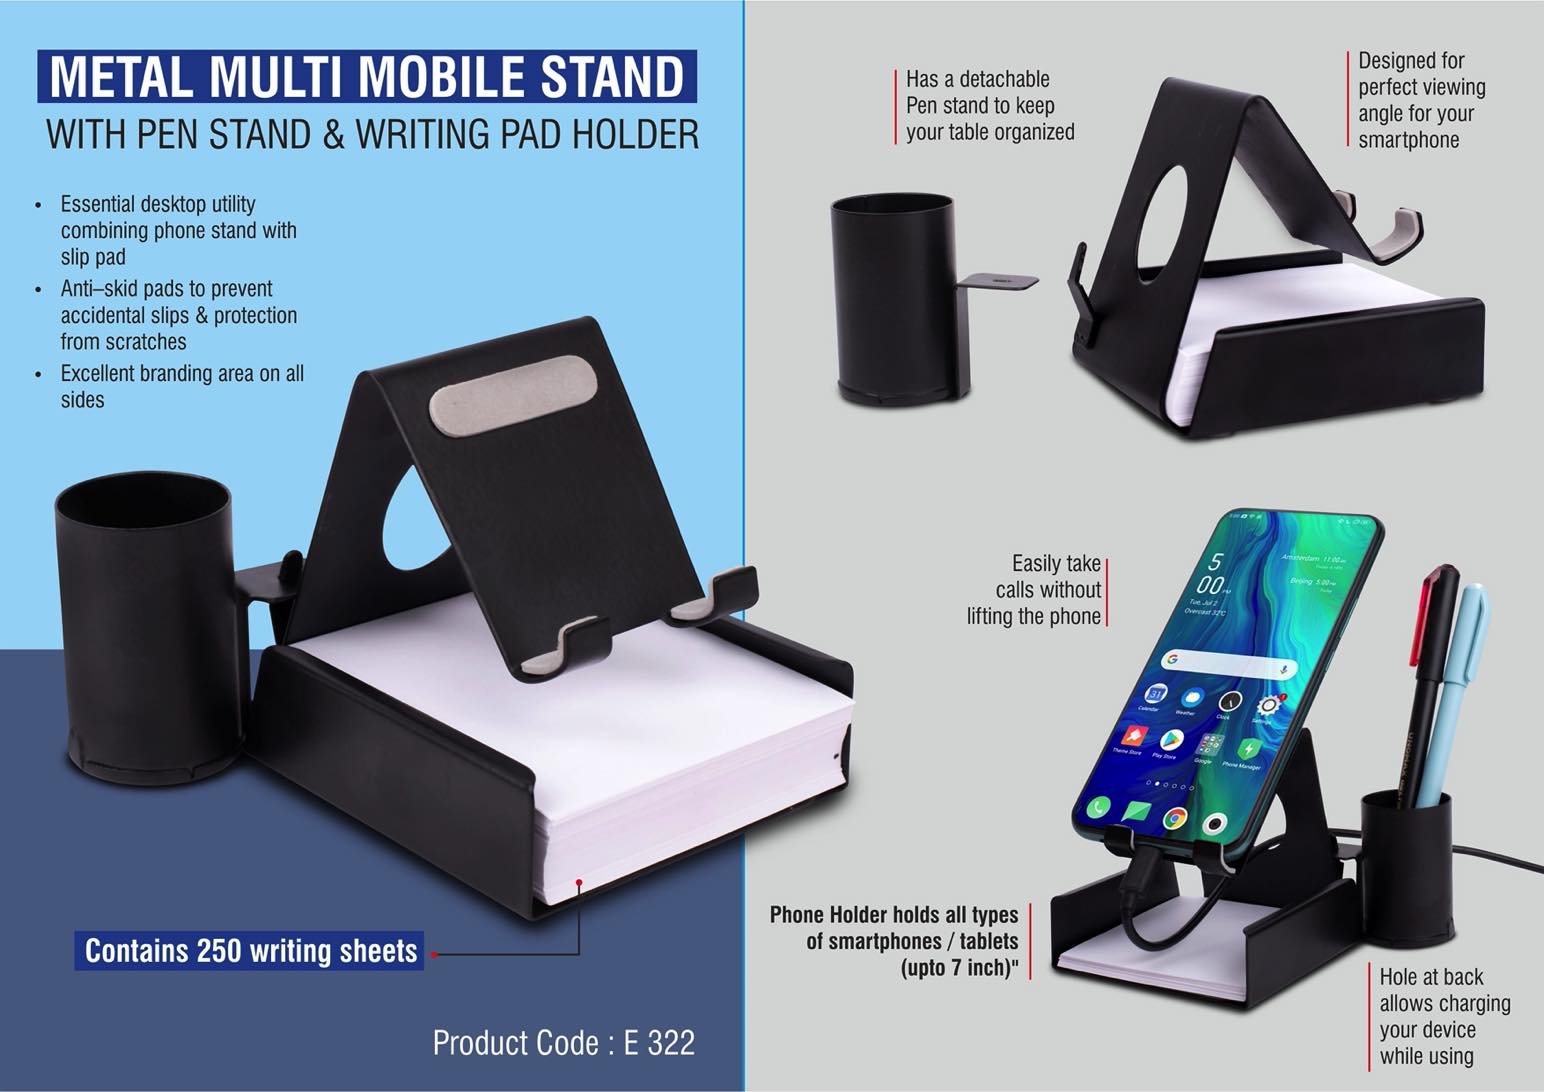 Metal Mobile Stand With Detachable Tumbler And Writing Pad Holder | 200 Writing Sheets Included